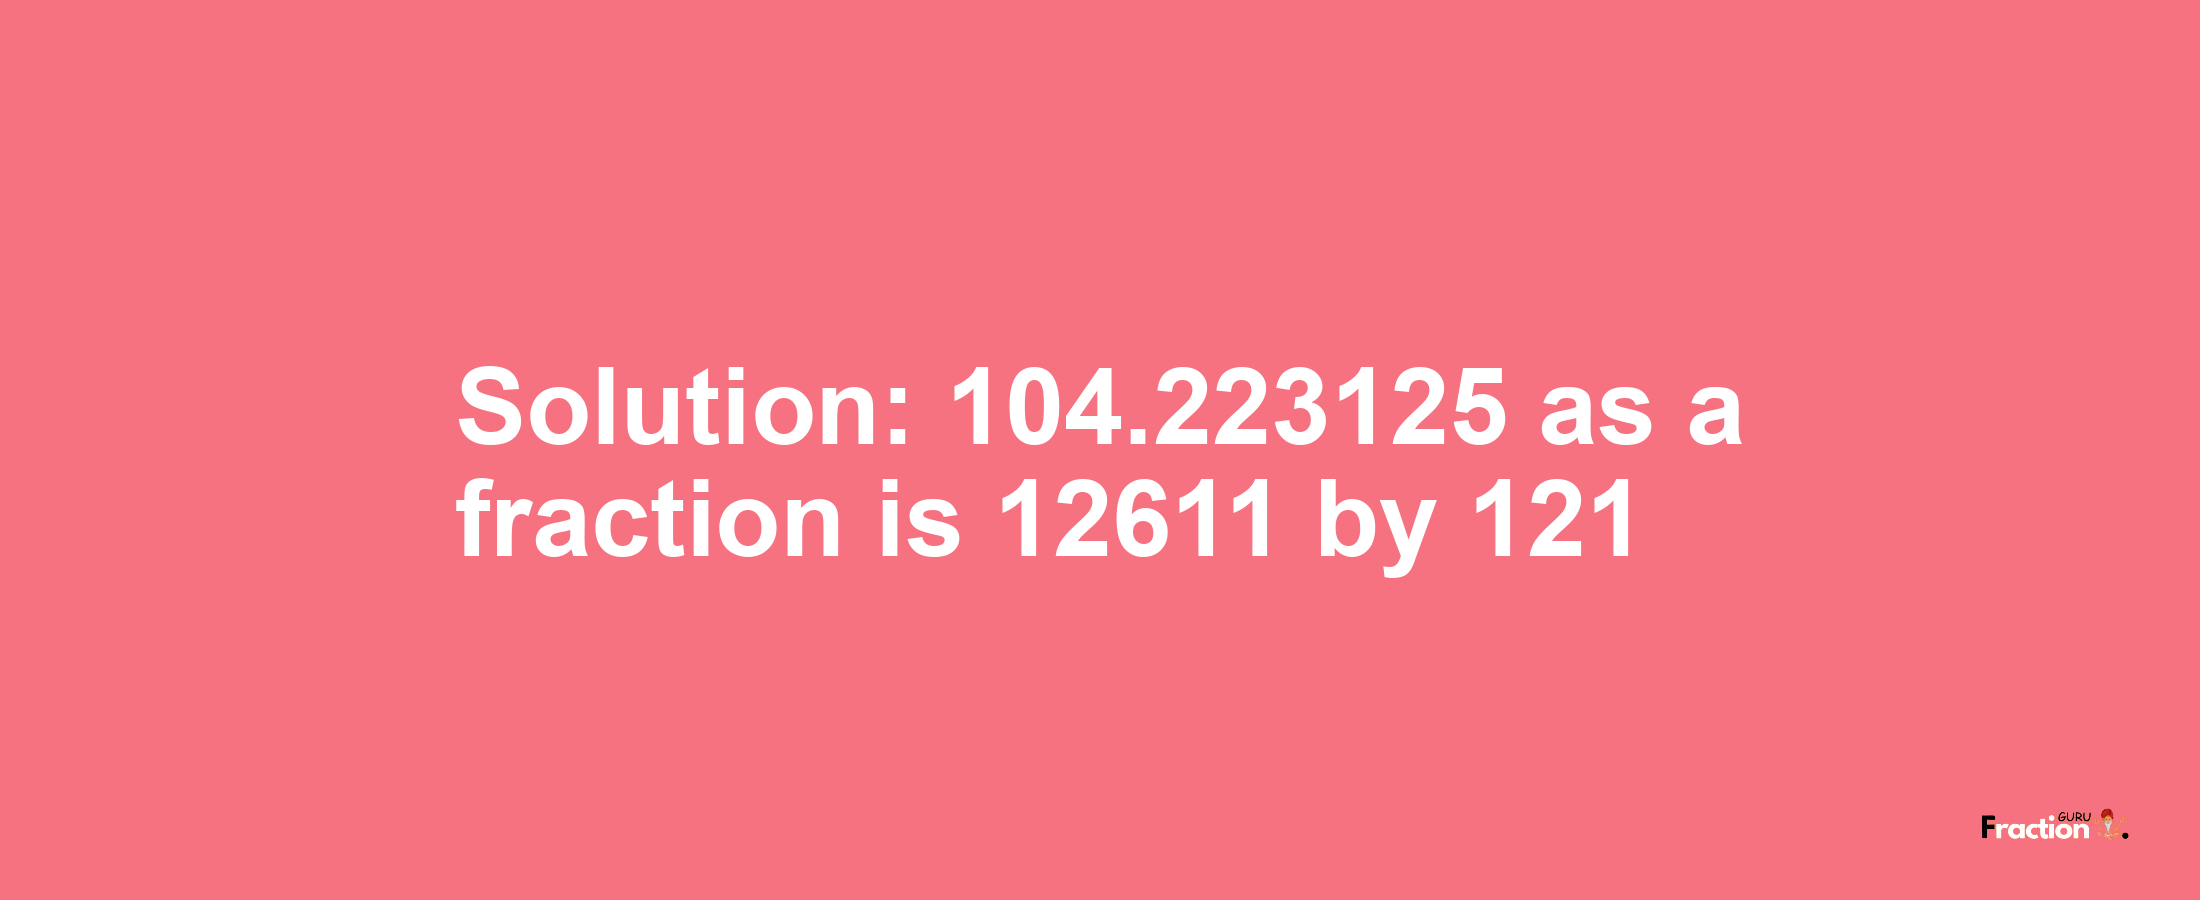 Solution:104.223125 as a fraction is 12611/121